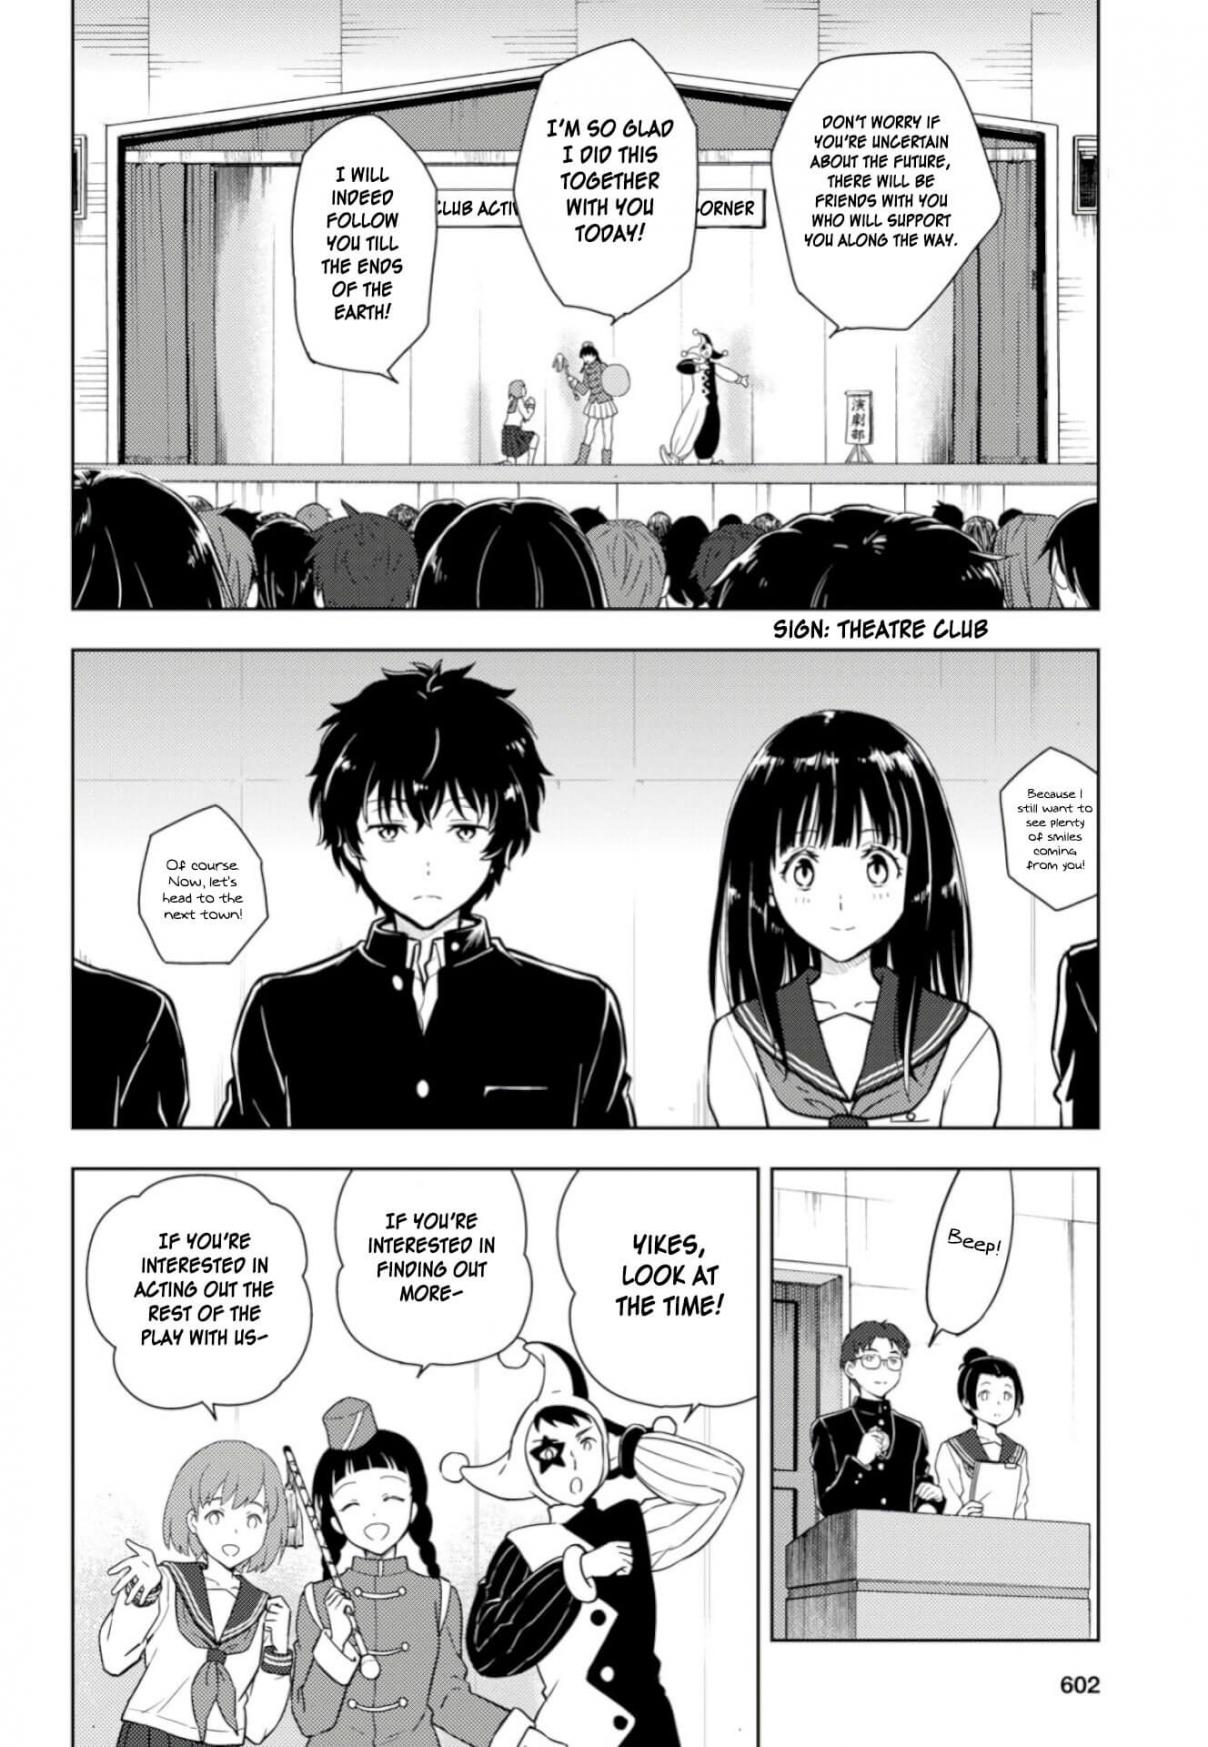 Hyouka Ch. 76 Club Applications Right Over Here! ①